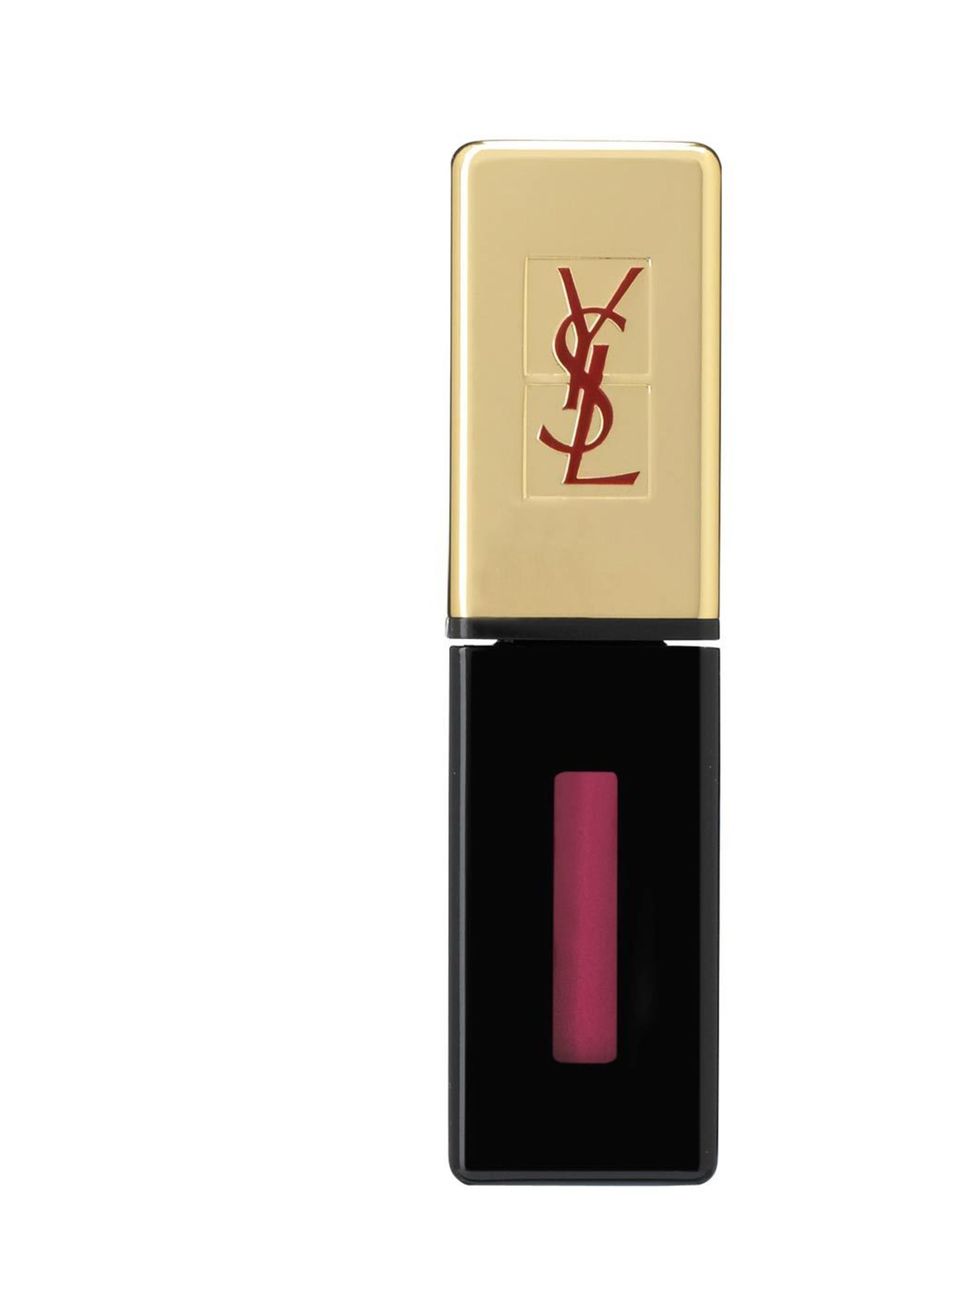 <p>This genius hybrid product delivers a hit of colour along with a lacquered finish, yet still feels comfortable on lips.</p><p><em>YSL Rouge Pur Couture Glossy Stain Lip Stain, £22.50 at <a href="http://www.selfridges.com/en/Beauty/Categories/Make-up-co